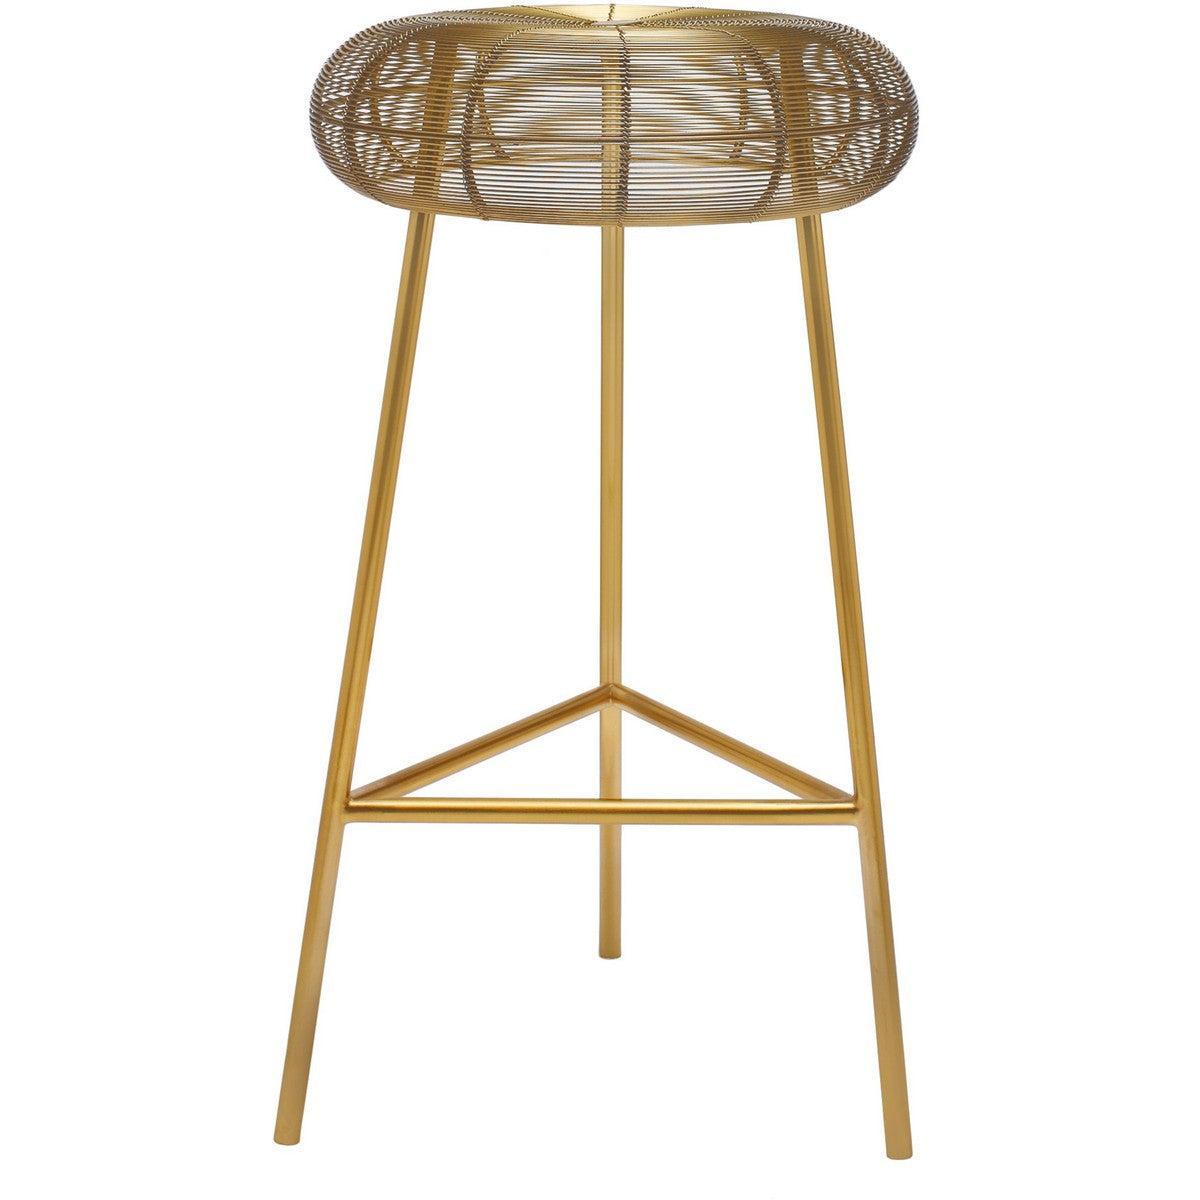 Meridian Furniture Tuscany Gold Counter StoolMeridian Furniture - Counter Stool - Minimal And Modern - 1